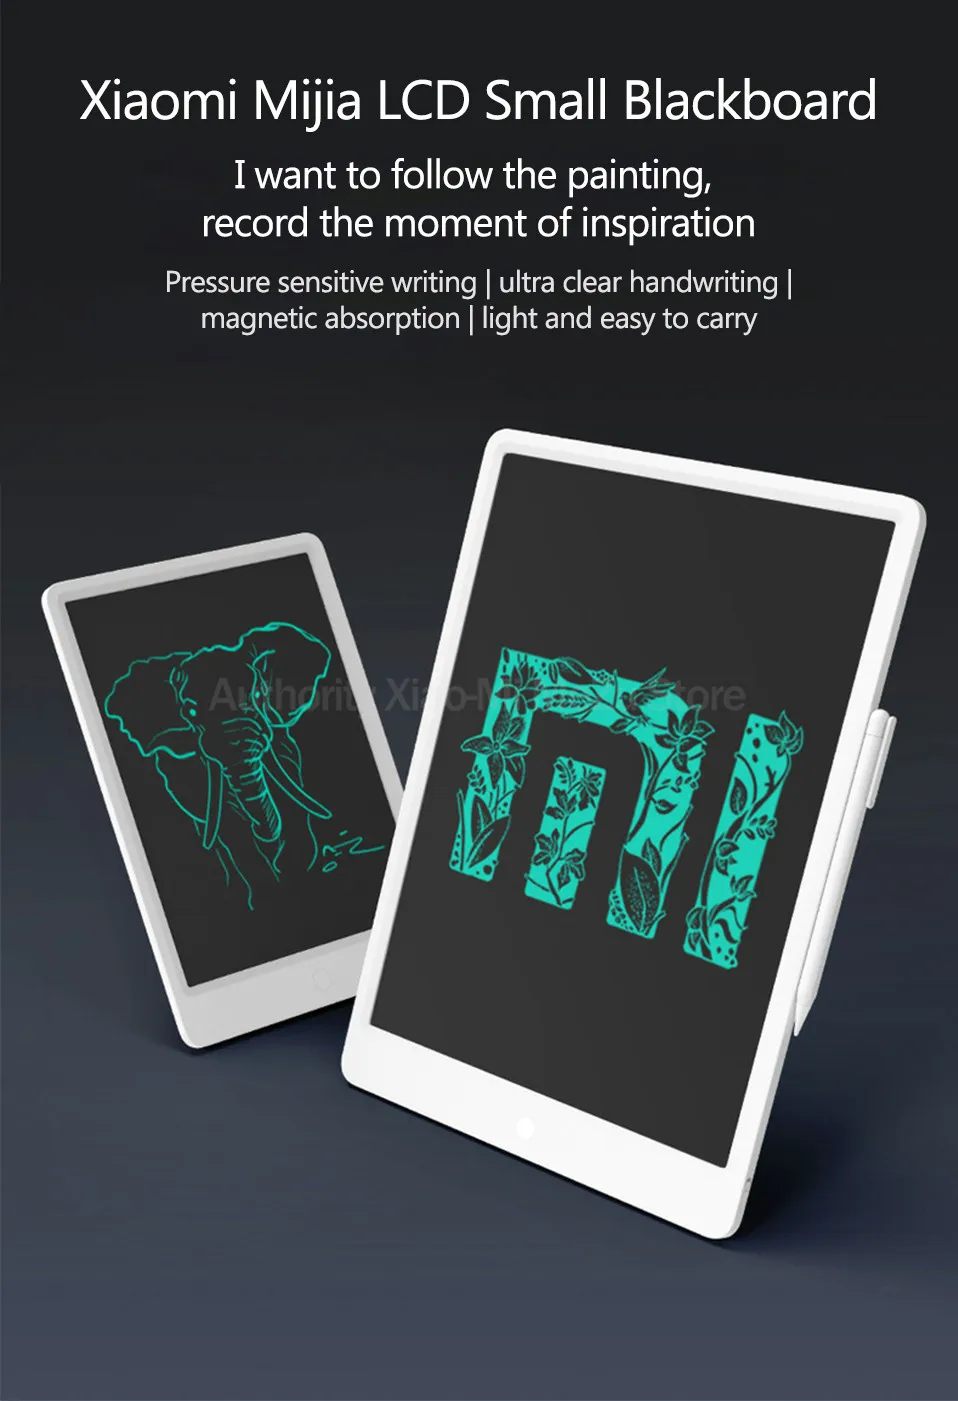 In Stock Xiaomi Mijia LCD Writing Tablet with Pen Digital Drawing Electronic Handwriting Pad Message Graphics Board